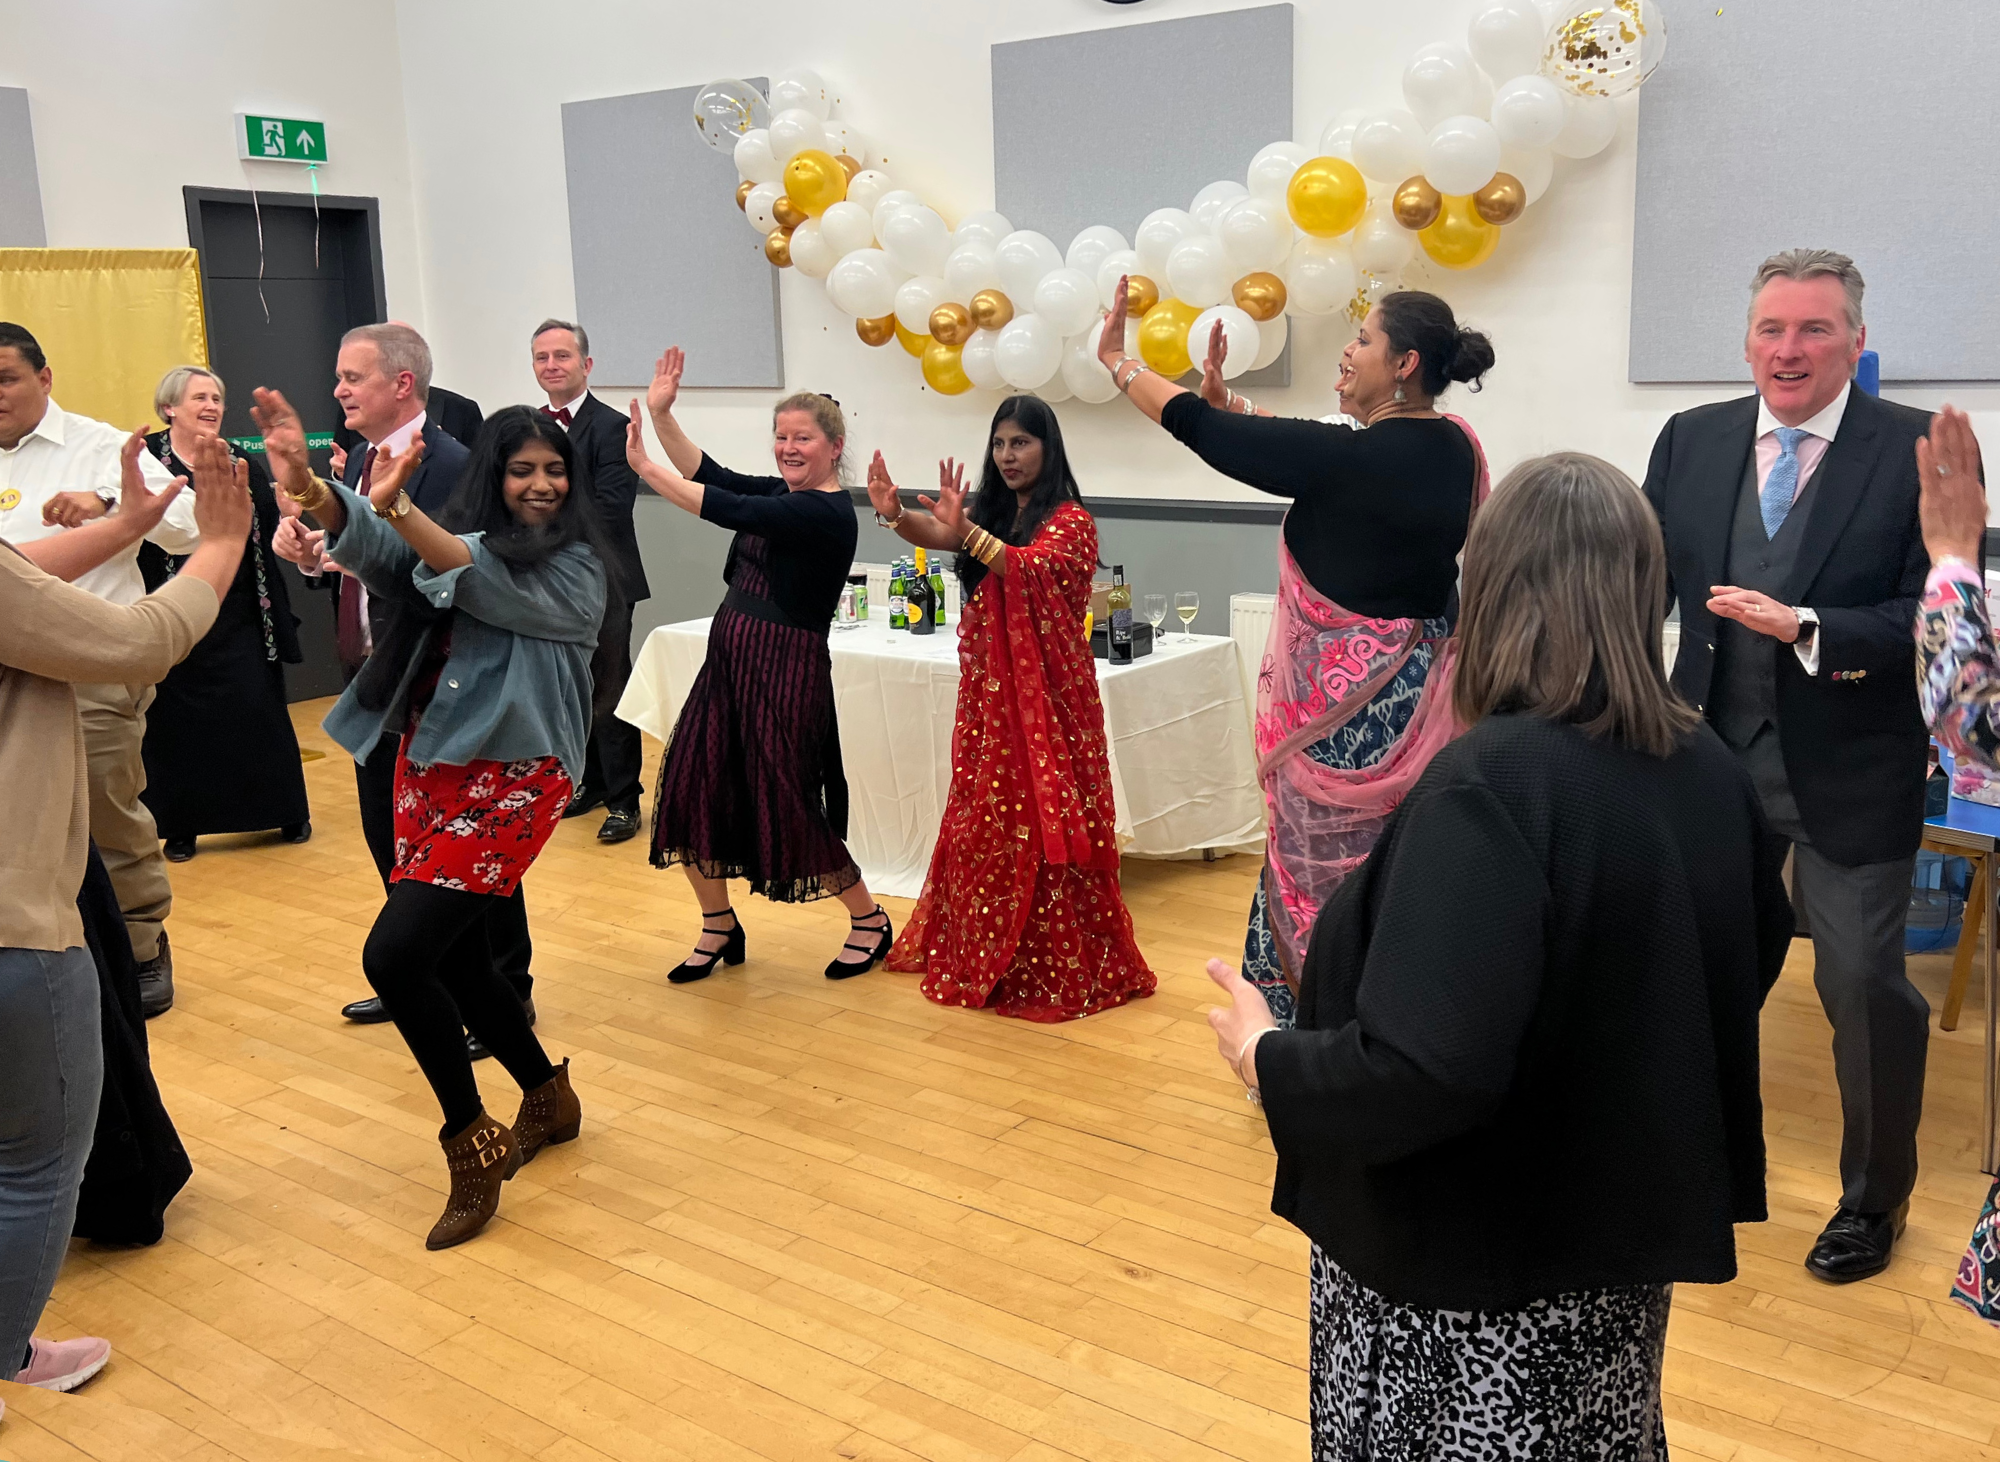 A hall full of people at Croydon Vision dancing together. Many are wearing special clothes and have their hands flung up to the left of their heads. The hall is decorated with white and gold balloons.